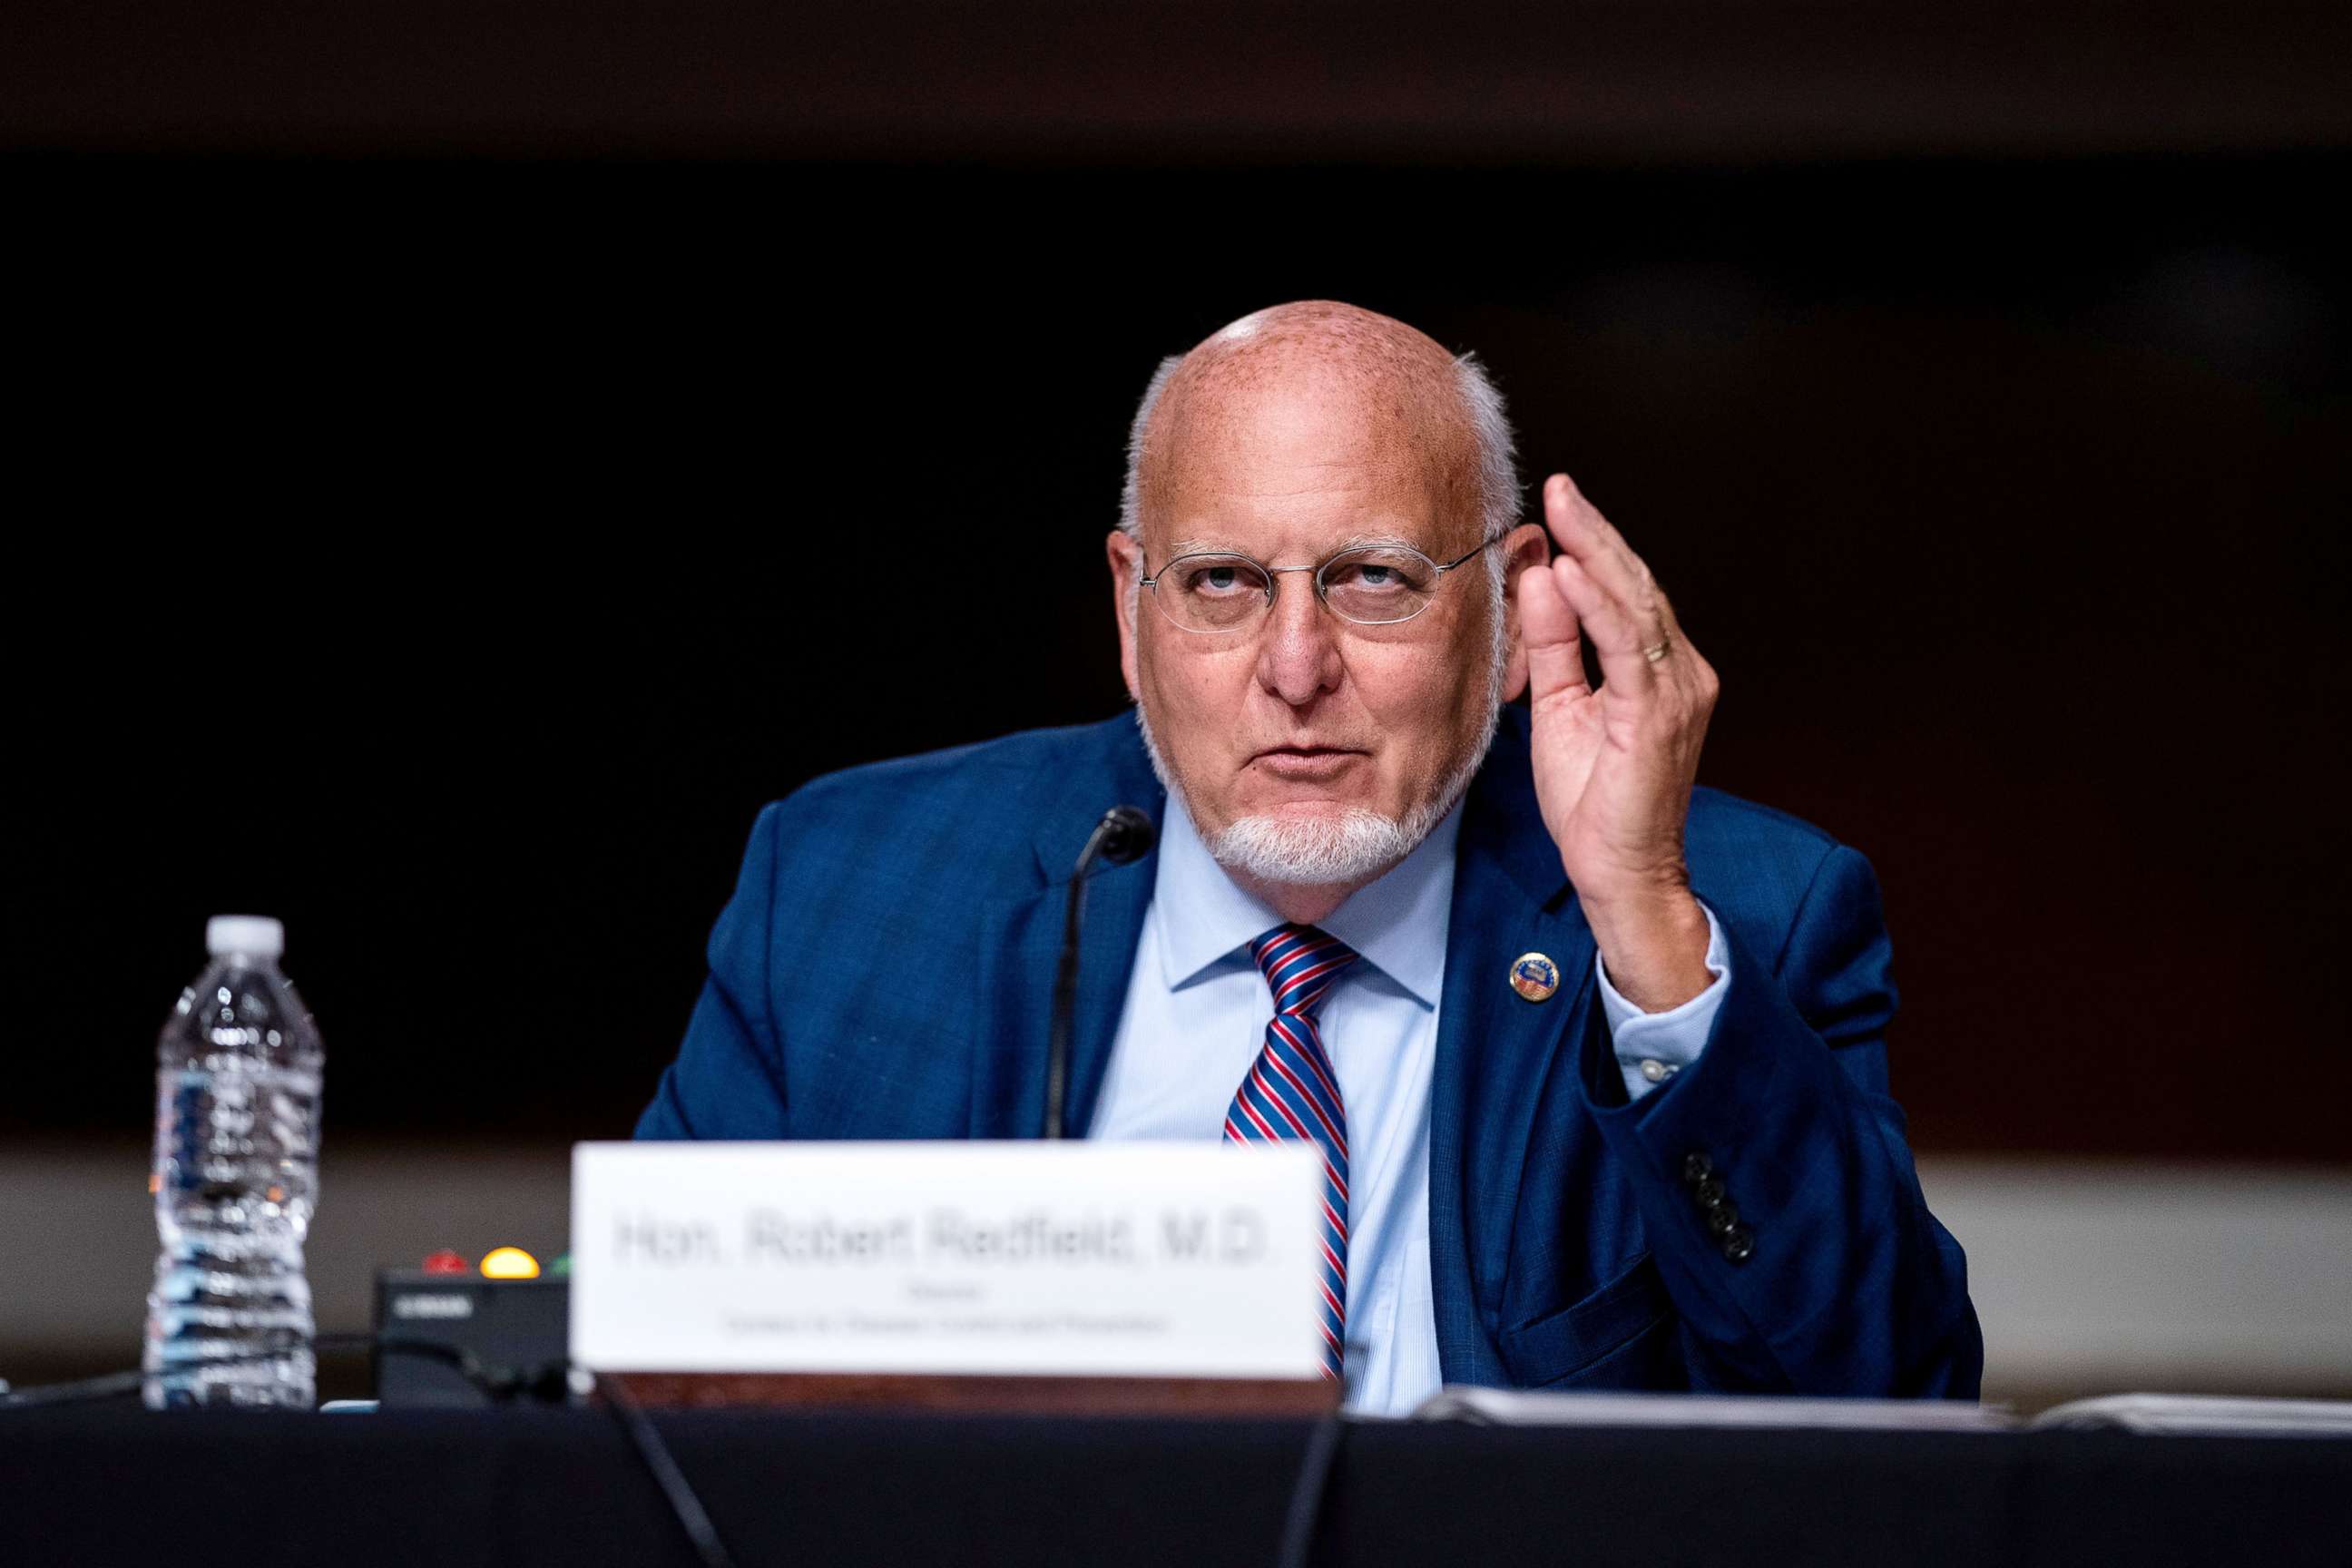 PHOTO: Robert R. Redfield, Director for Centers for Disease Control and Prevention, speaks during a hearing on Capitol Hill, Sept. 16, 2020.